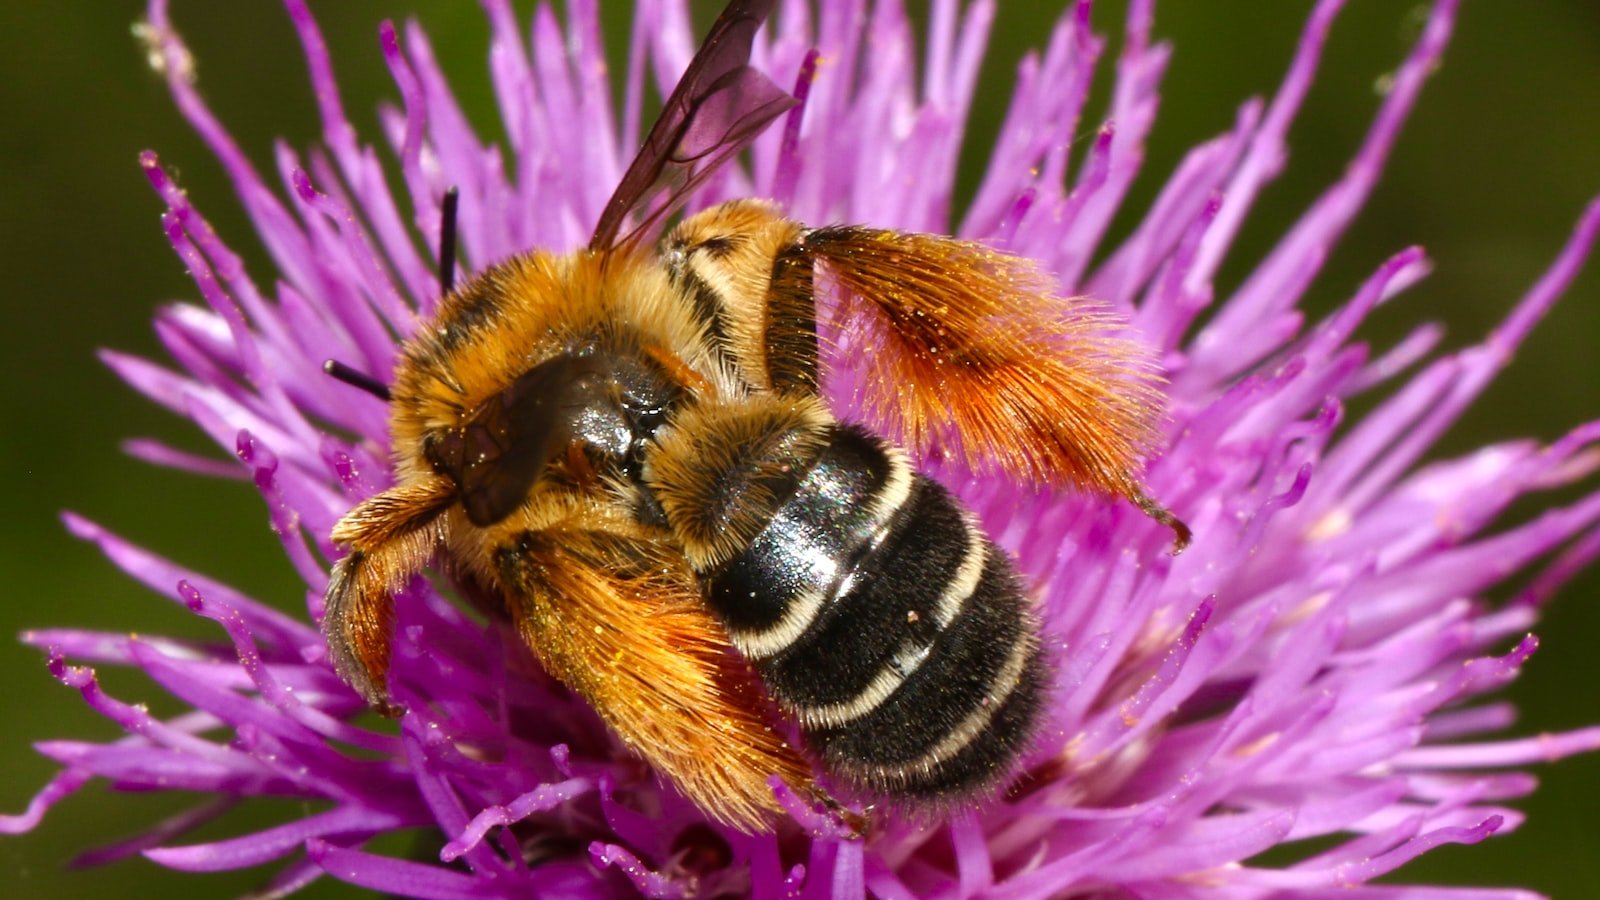 Promoting Bee Conservation: Actions You Can Take to Support Biodiversity